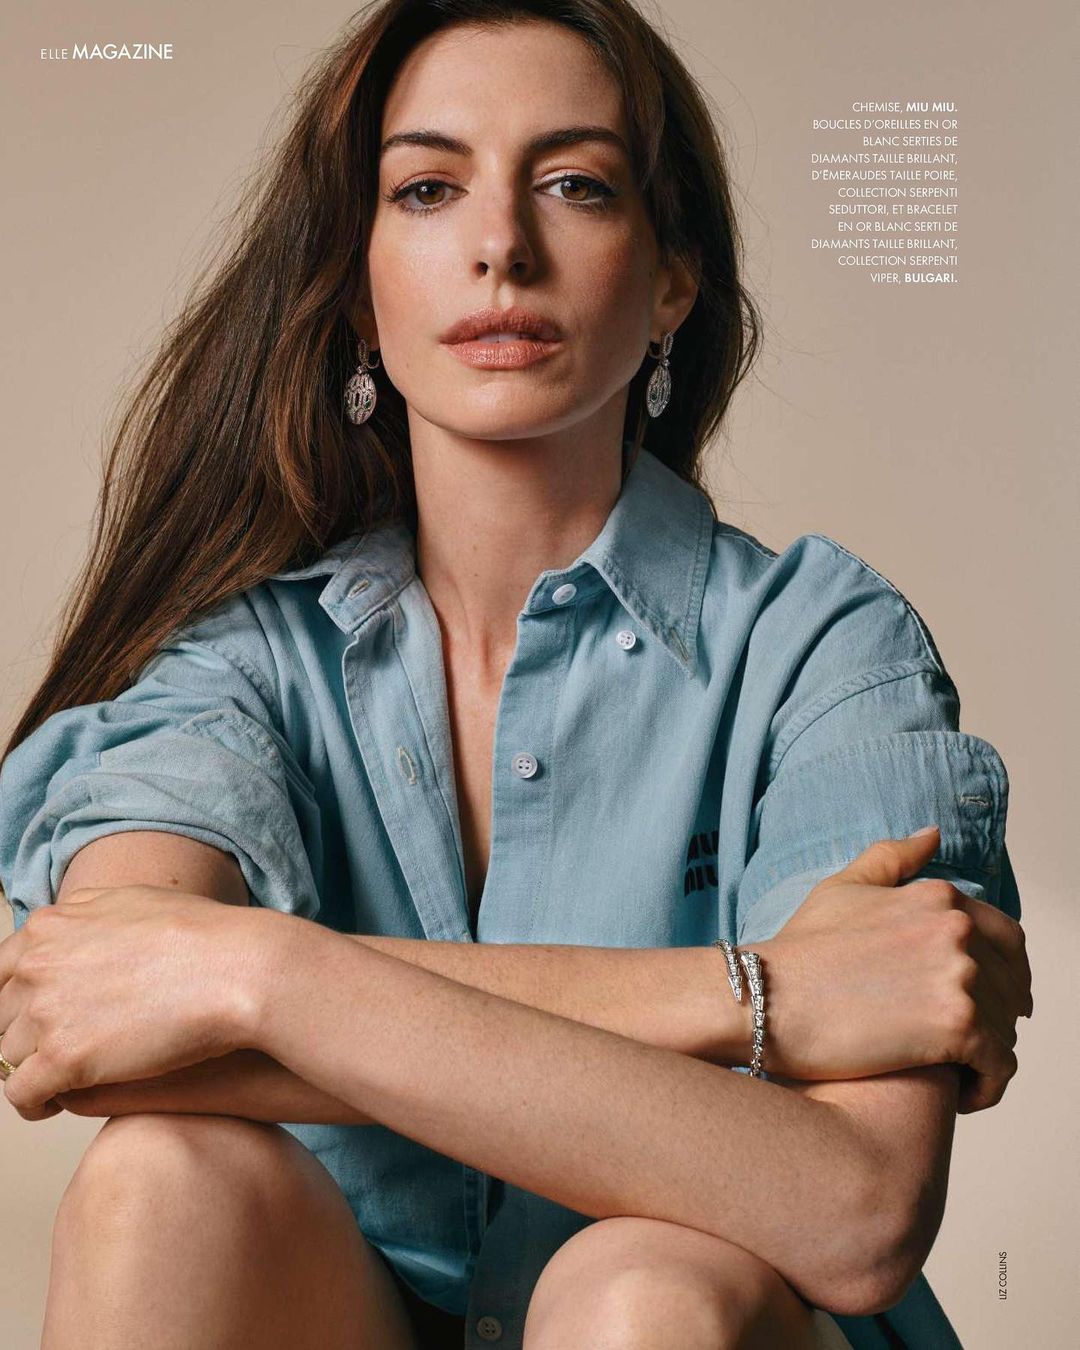 New images from @ellefr! Had such a lovely time shooting this story in a country where they honor reproductive rights xx